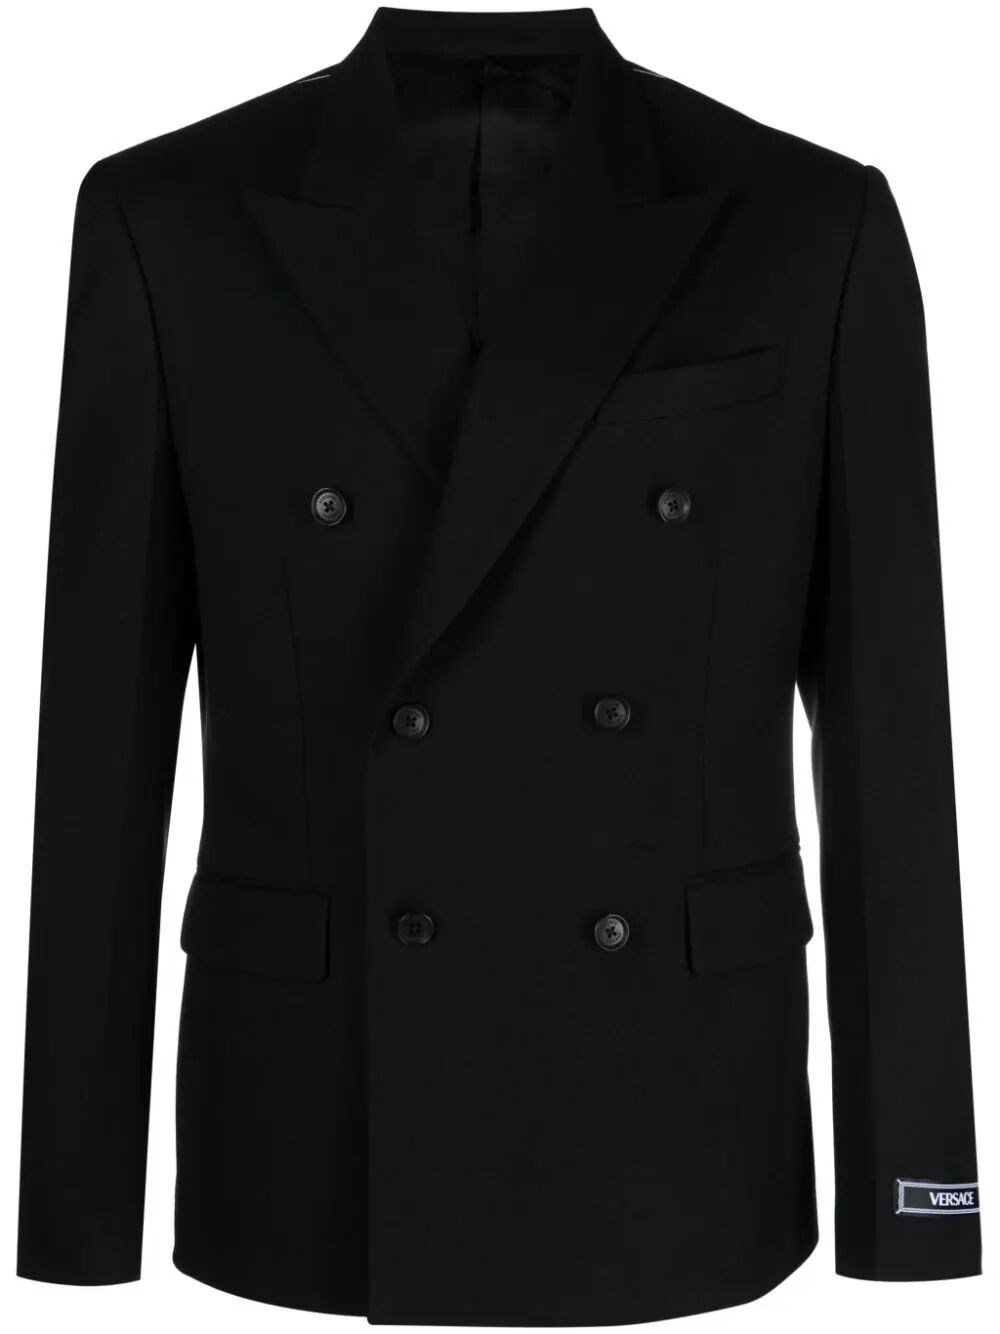 VERSACE FORMAL DOUBLE-BREASTED JACKET